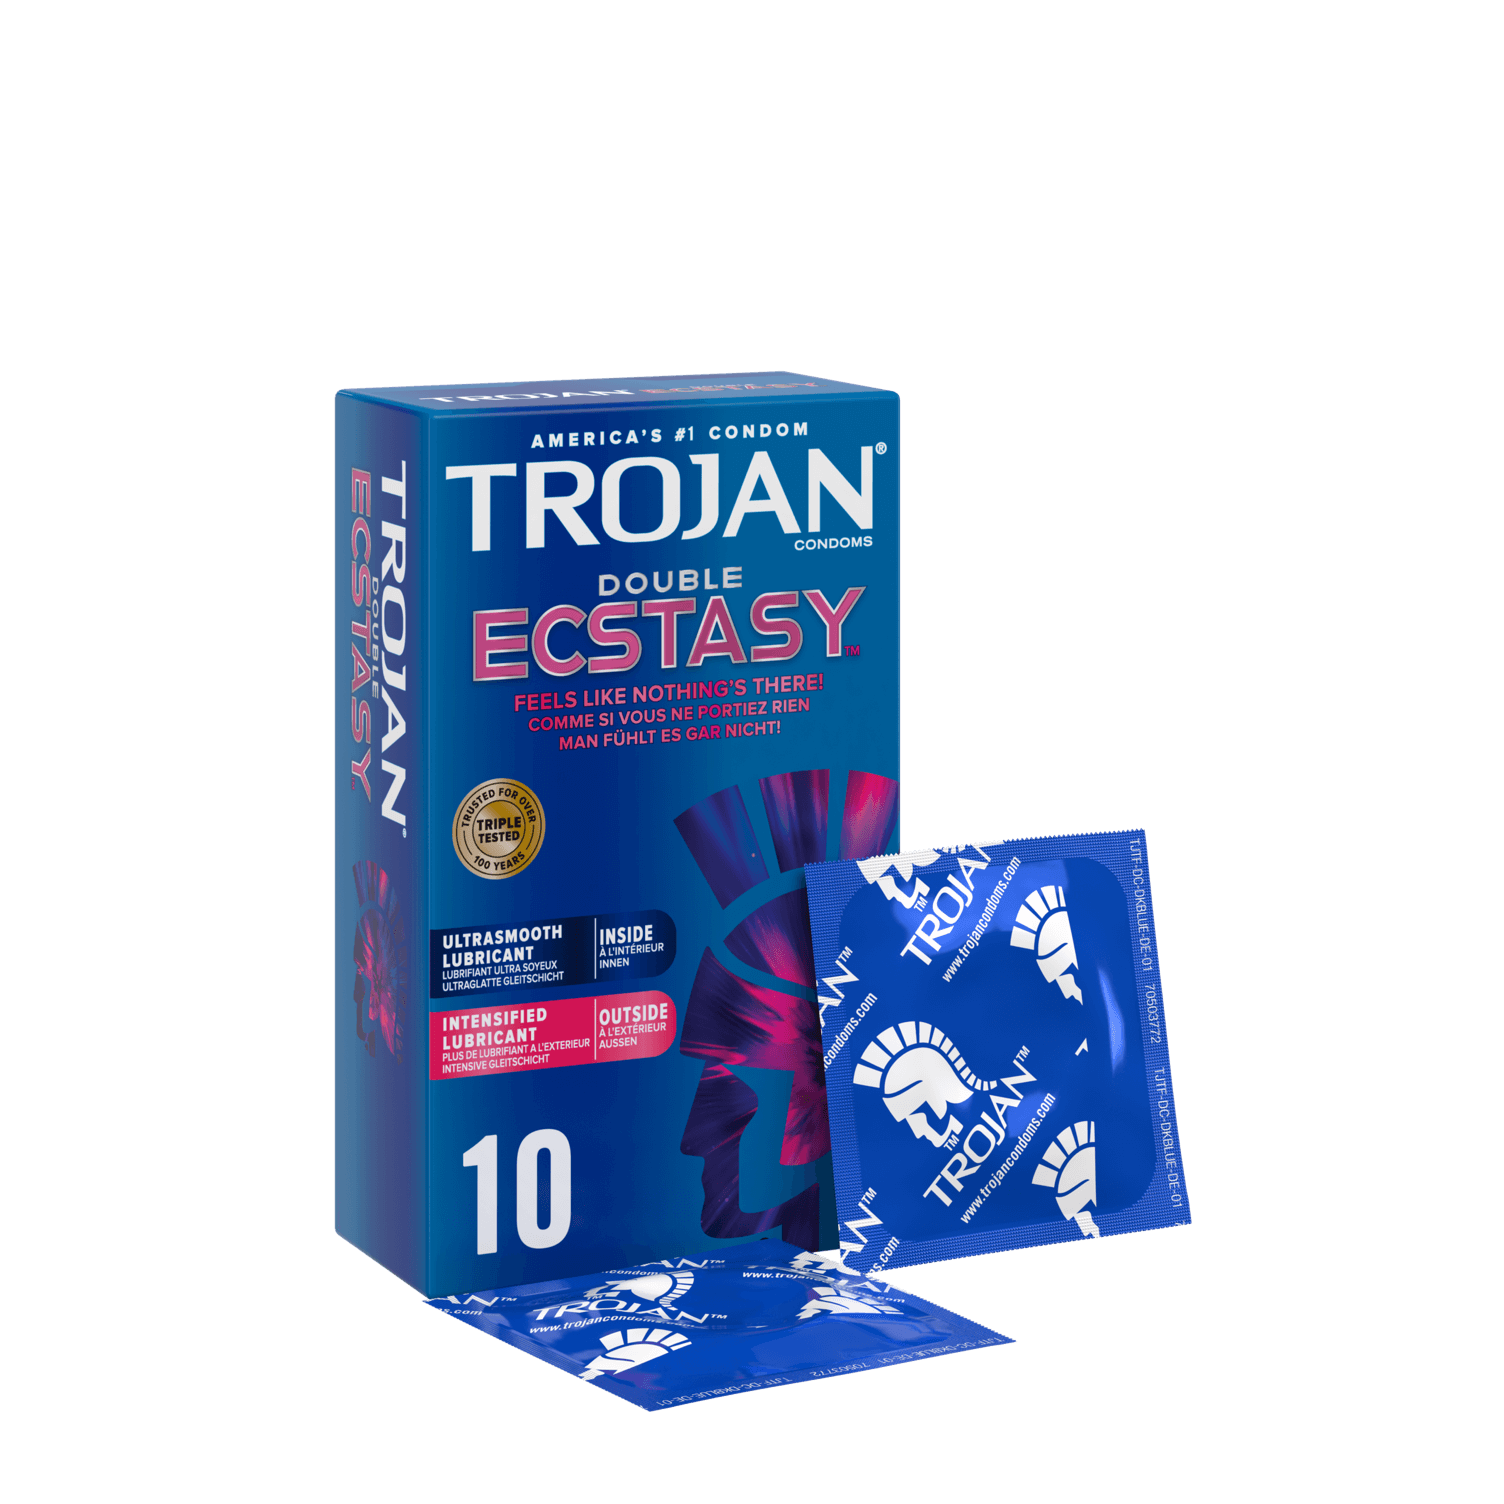 Trojan Double Ecstasy double-lubricated condom package and wrapper.